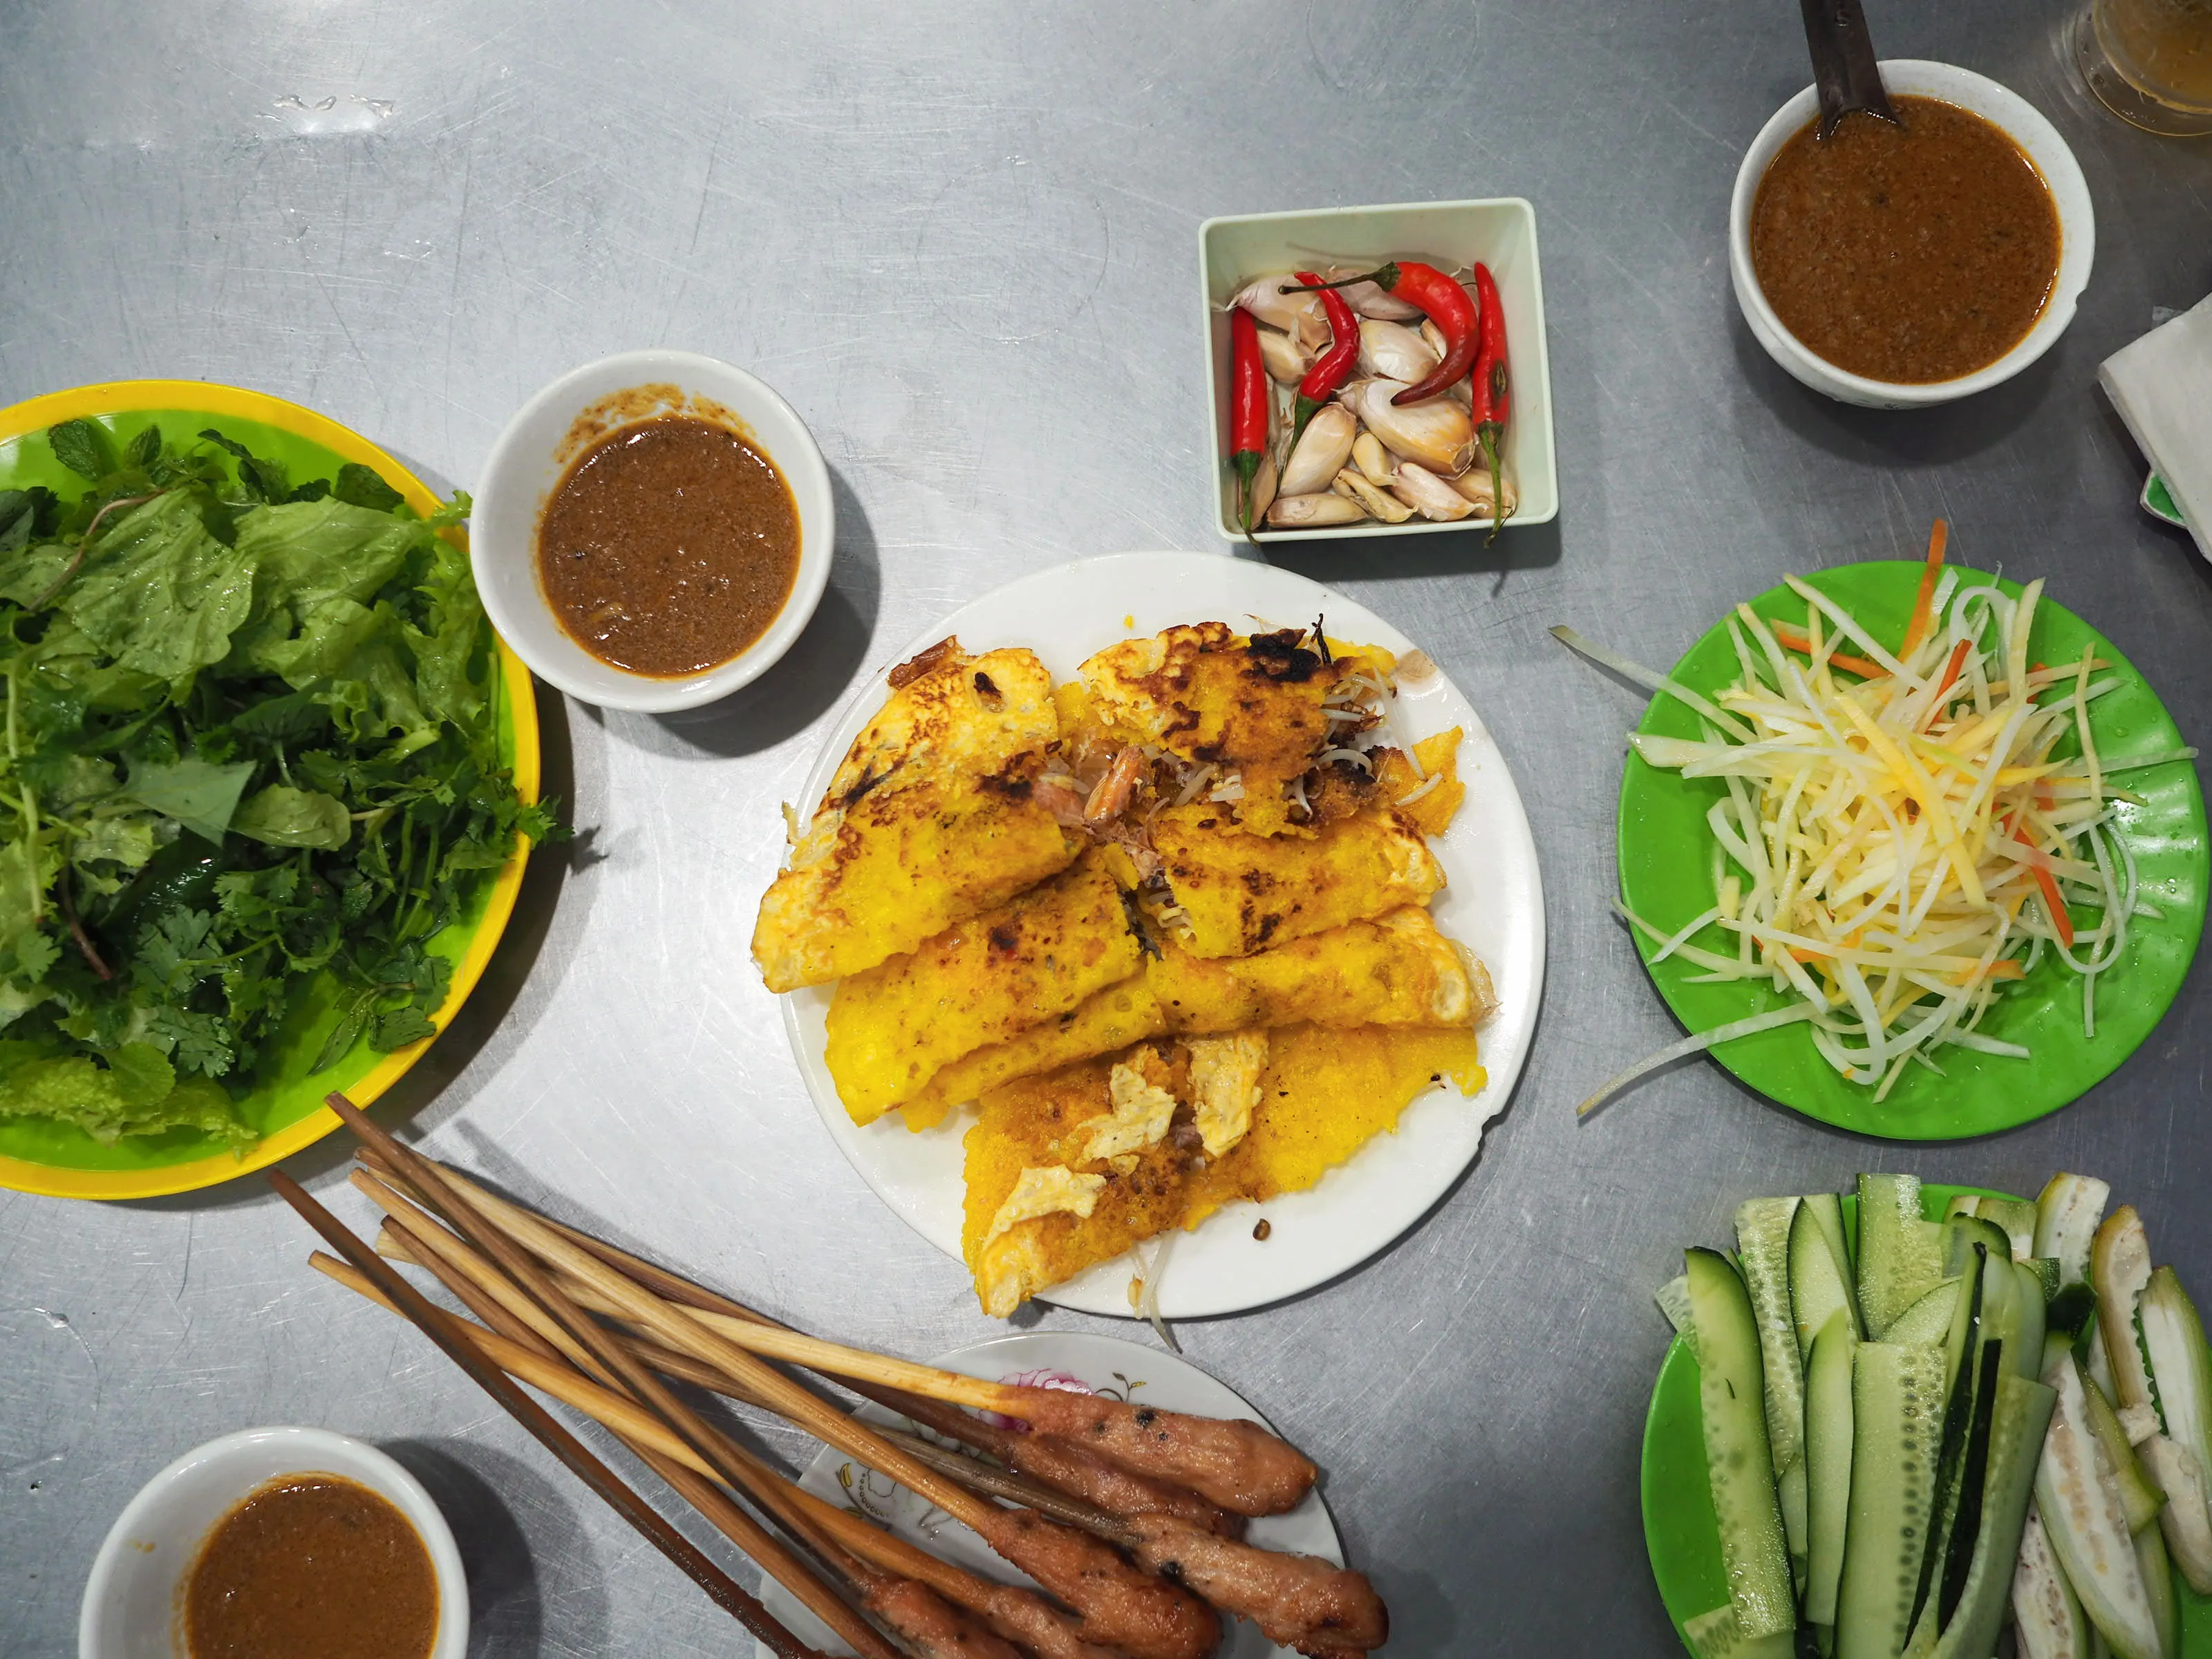 To eat Banh Xeo, you take a piece of rice paper, pile greens, pancake, bean sprouts, ginger, vegetables onto it, pour sauce over it and then roll it into a wrap.